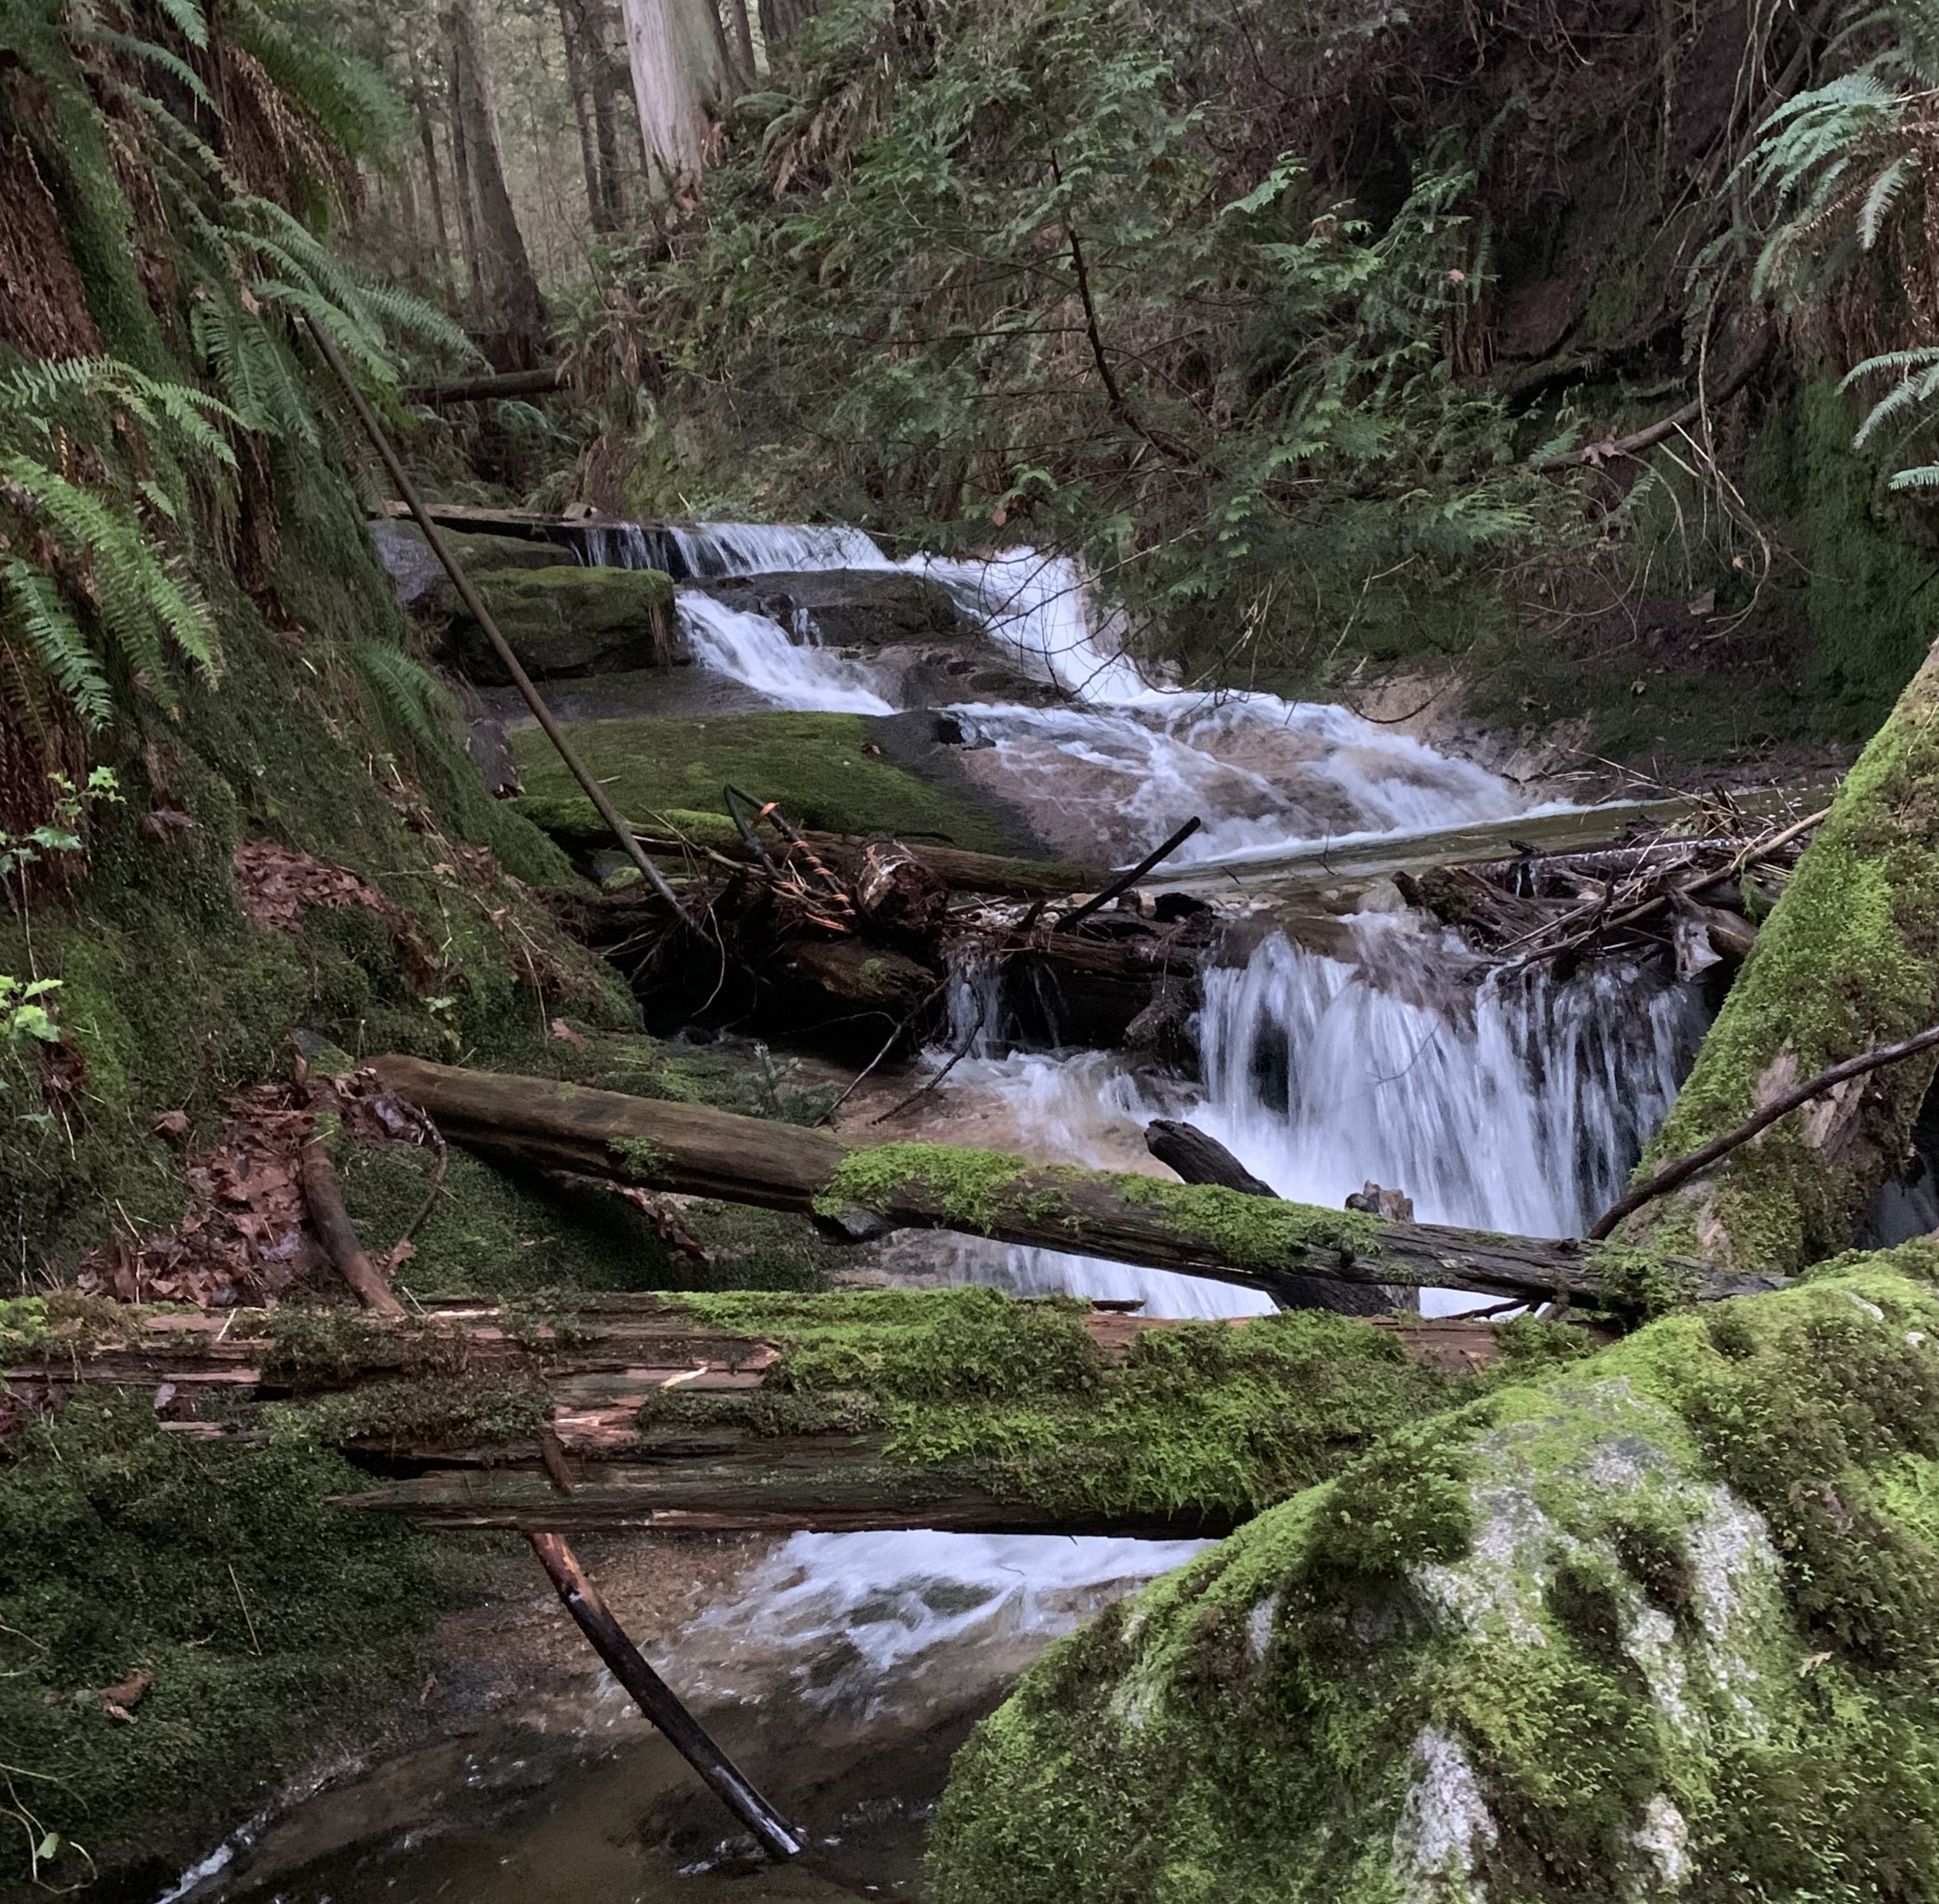 Water cascades over mossy logs and rocks in a green forest.